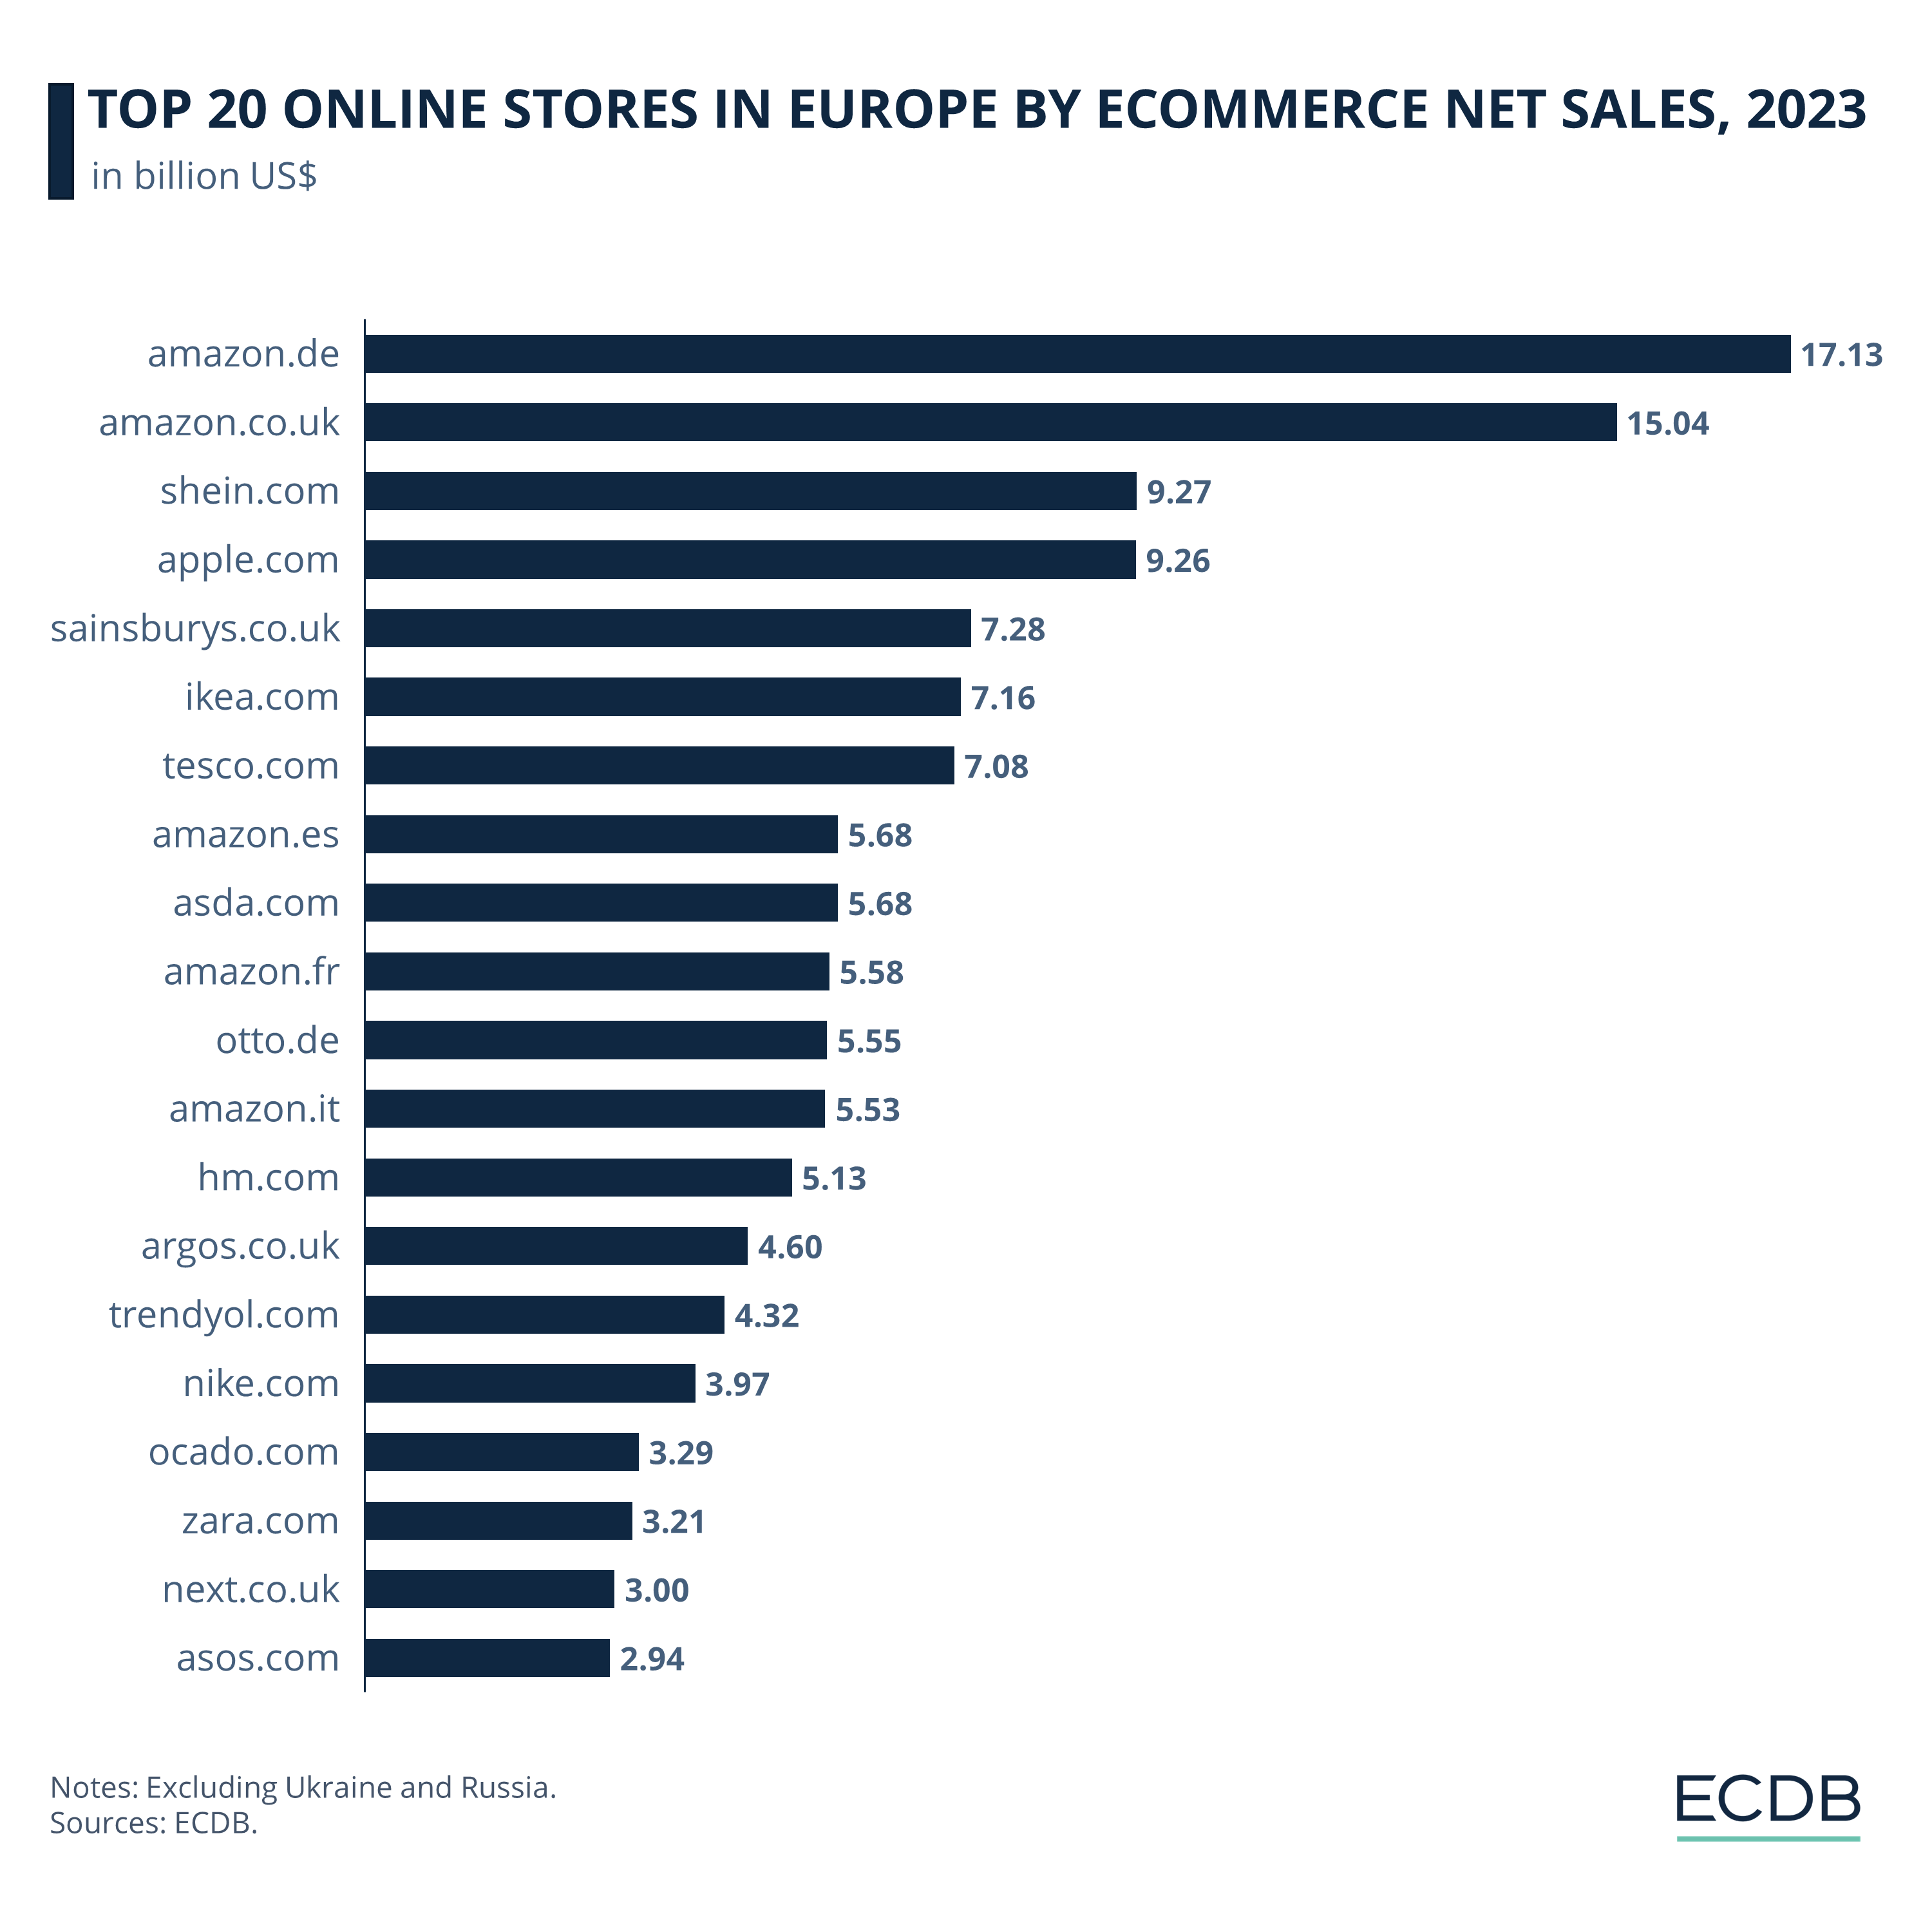 Top 20 Online Stores in Europe by eCommerce Net Sales, 2023